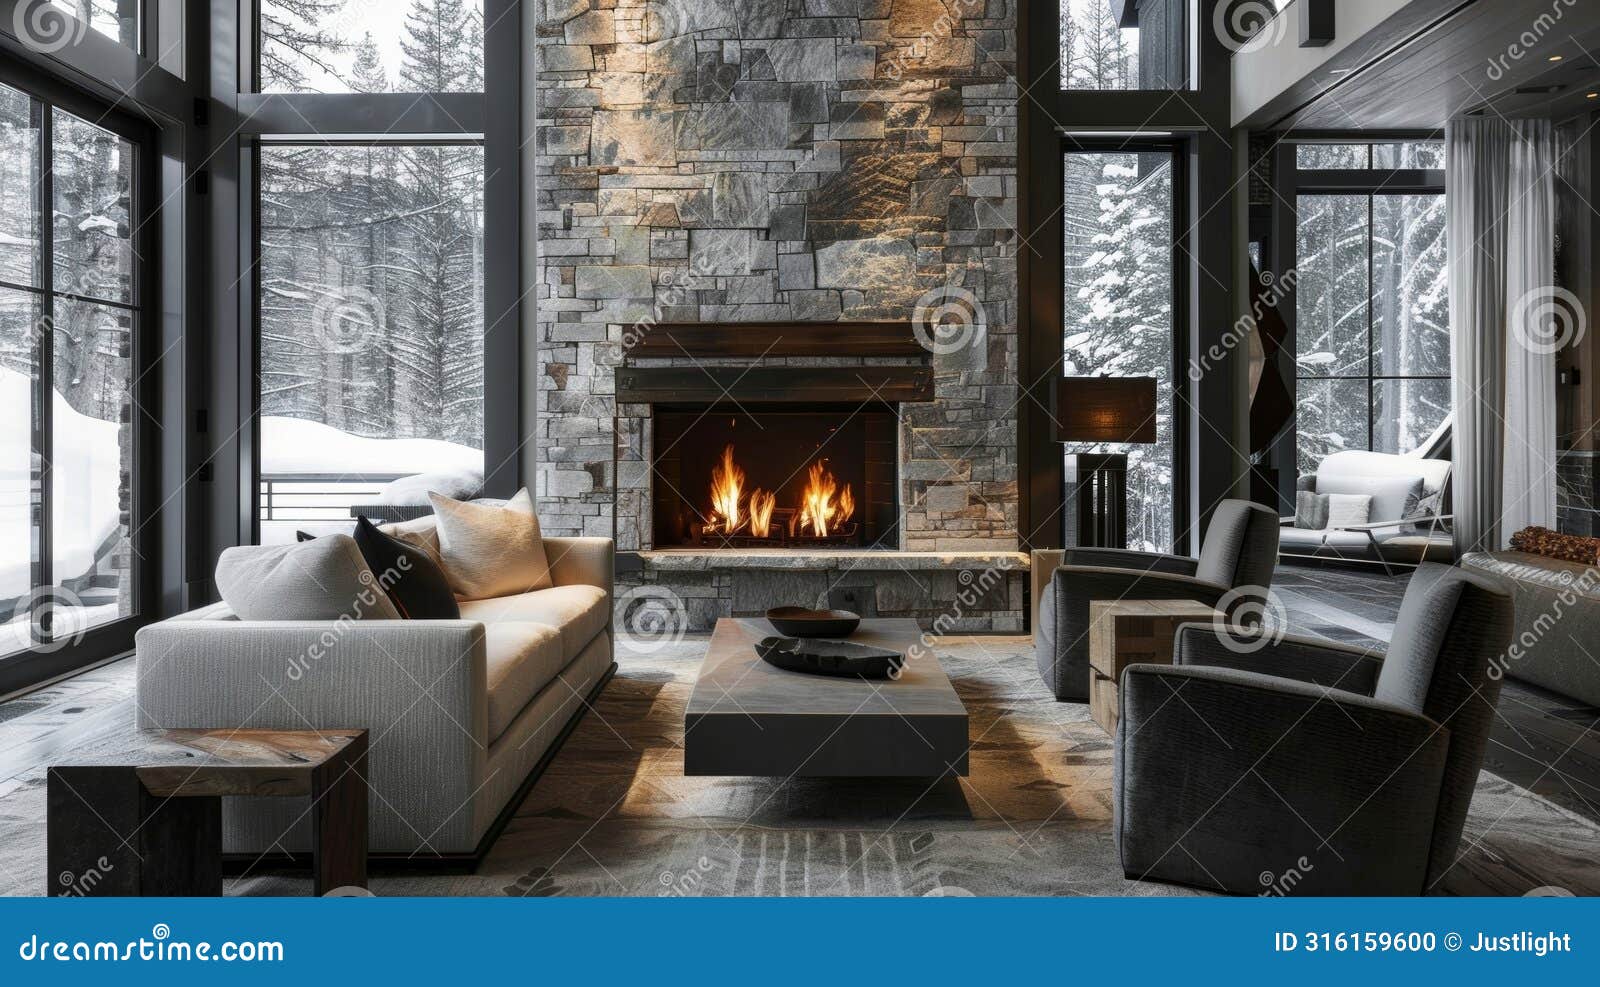 the rustic stone fireplace contrasts beautifully against the sleek contemporary furniture in this monochromatic room. 2d